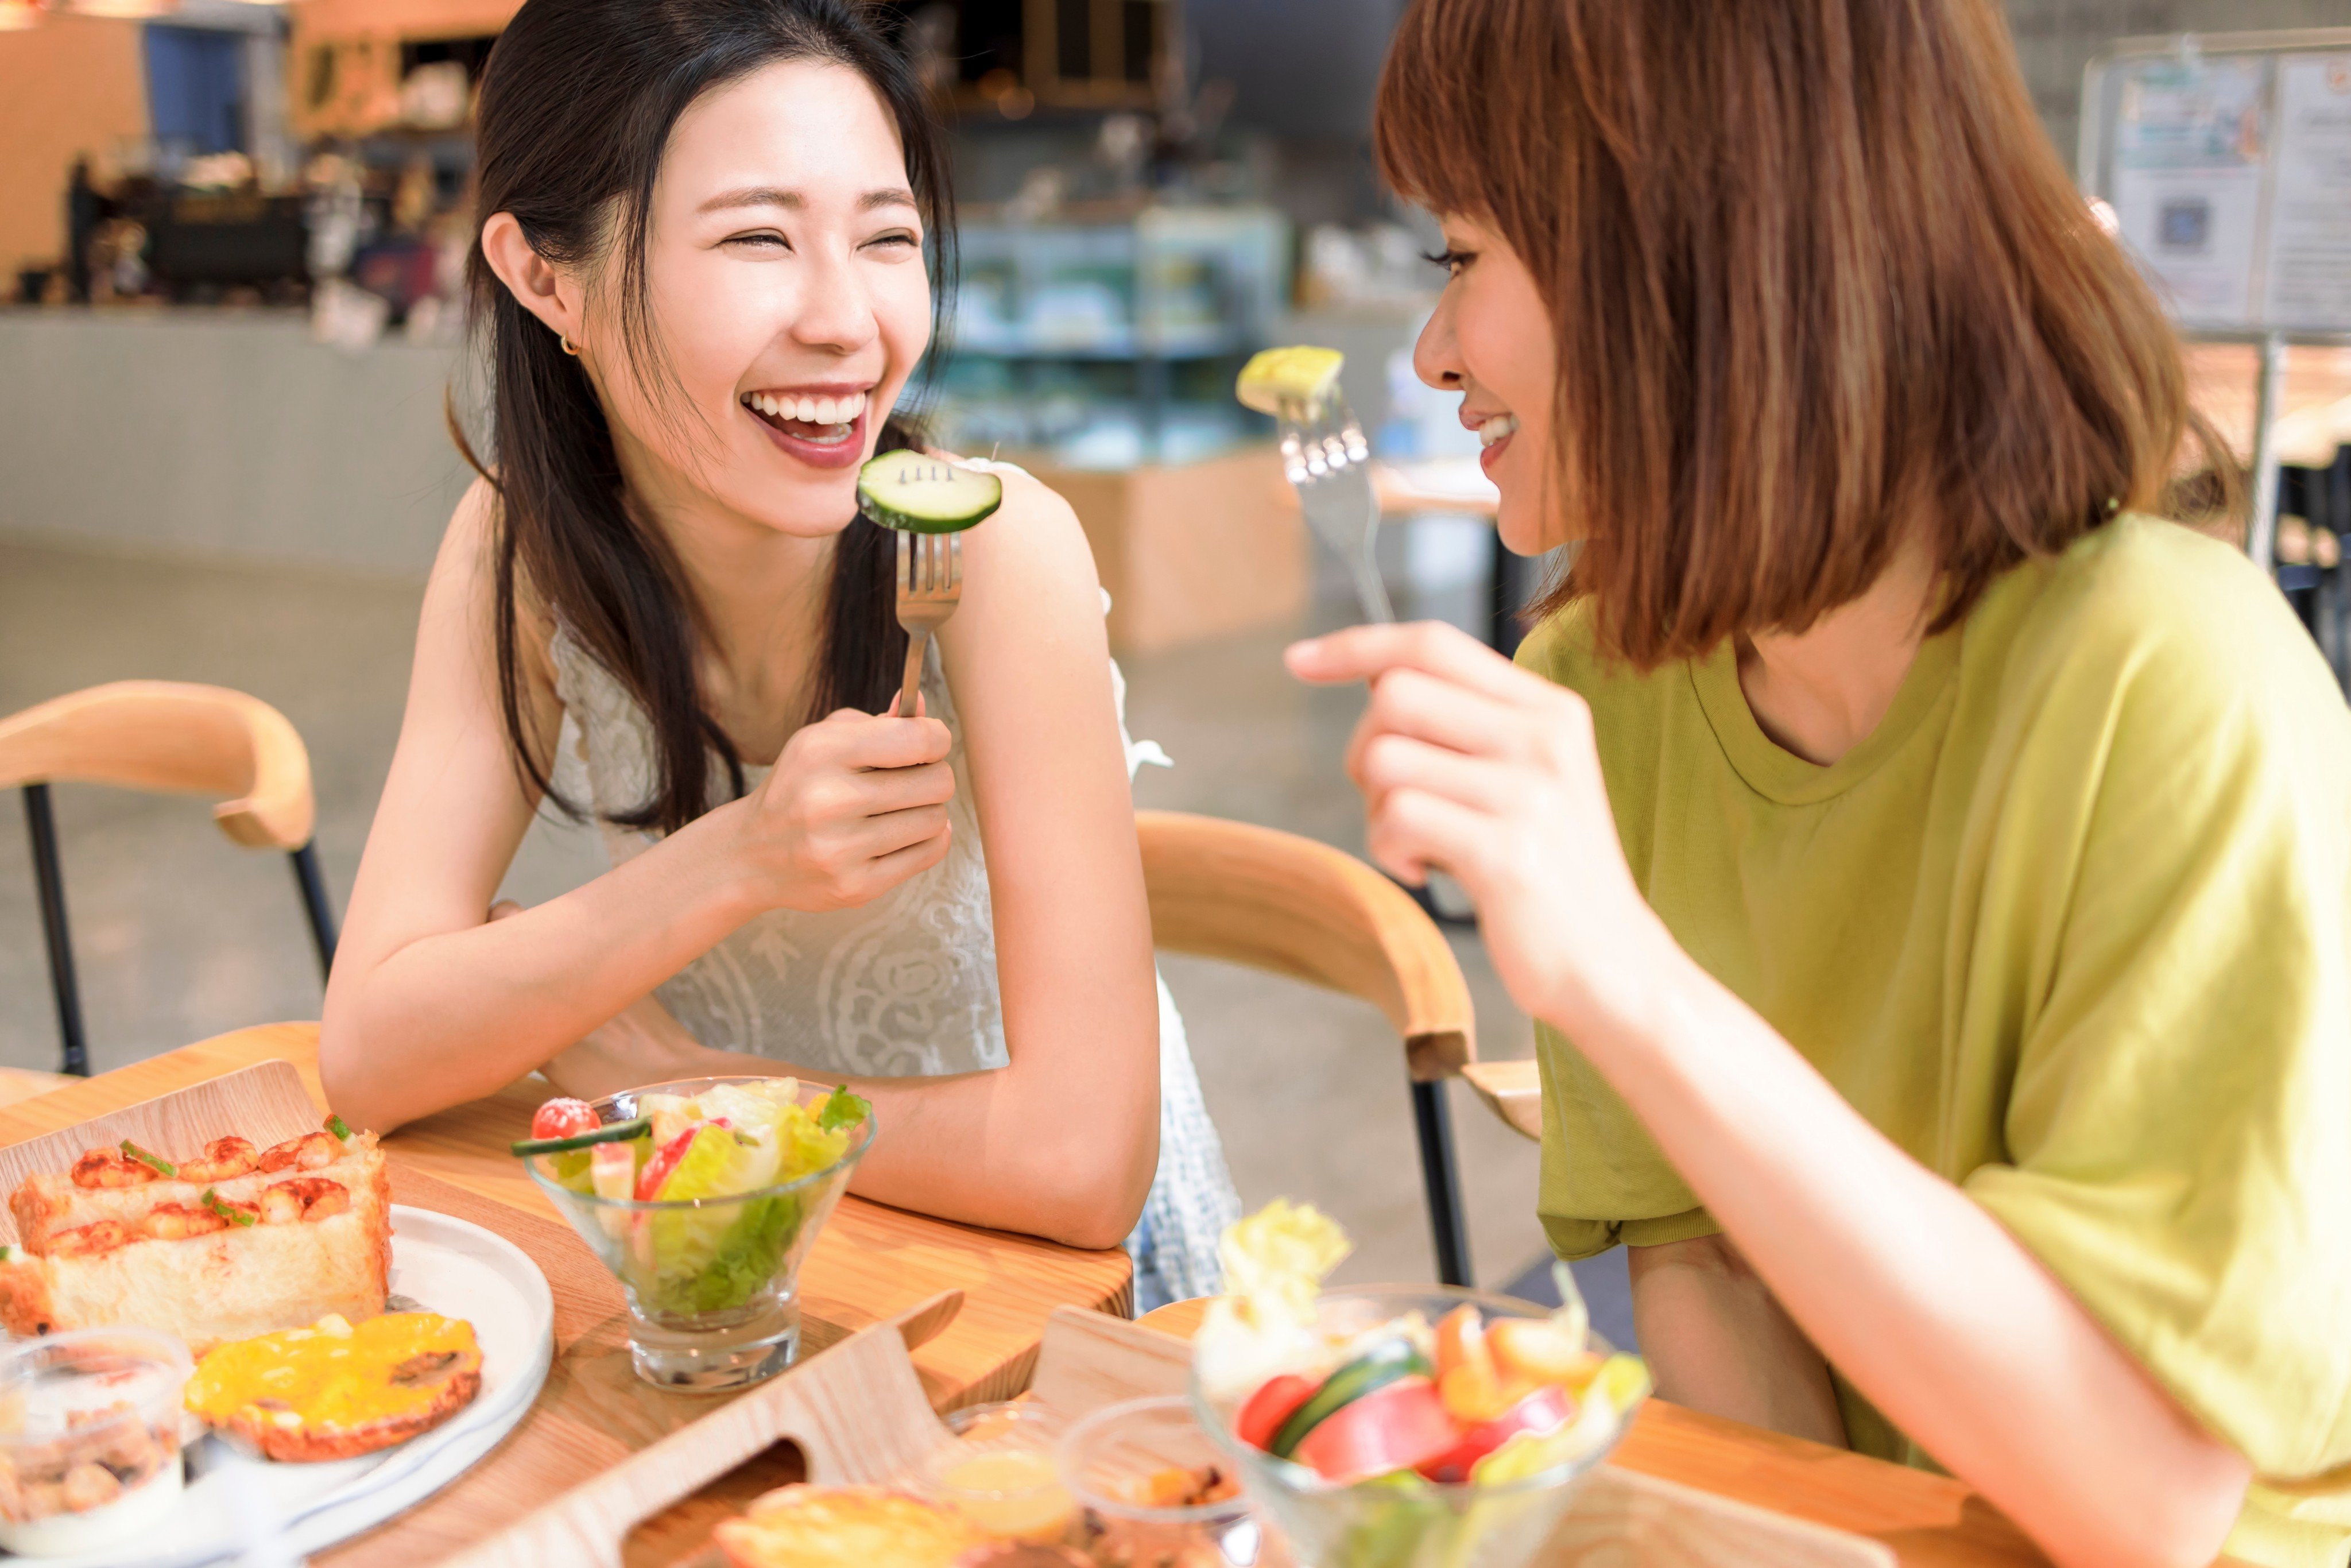 These women are enjoying a vegan meal, 
 but the Veganuary challenge – dropping all animal products from your diet for January – can be daunting. Experts give us their tips for success and explain the health benefits of a plant-based diet. Photo: Shutterstock